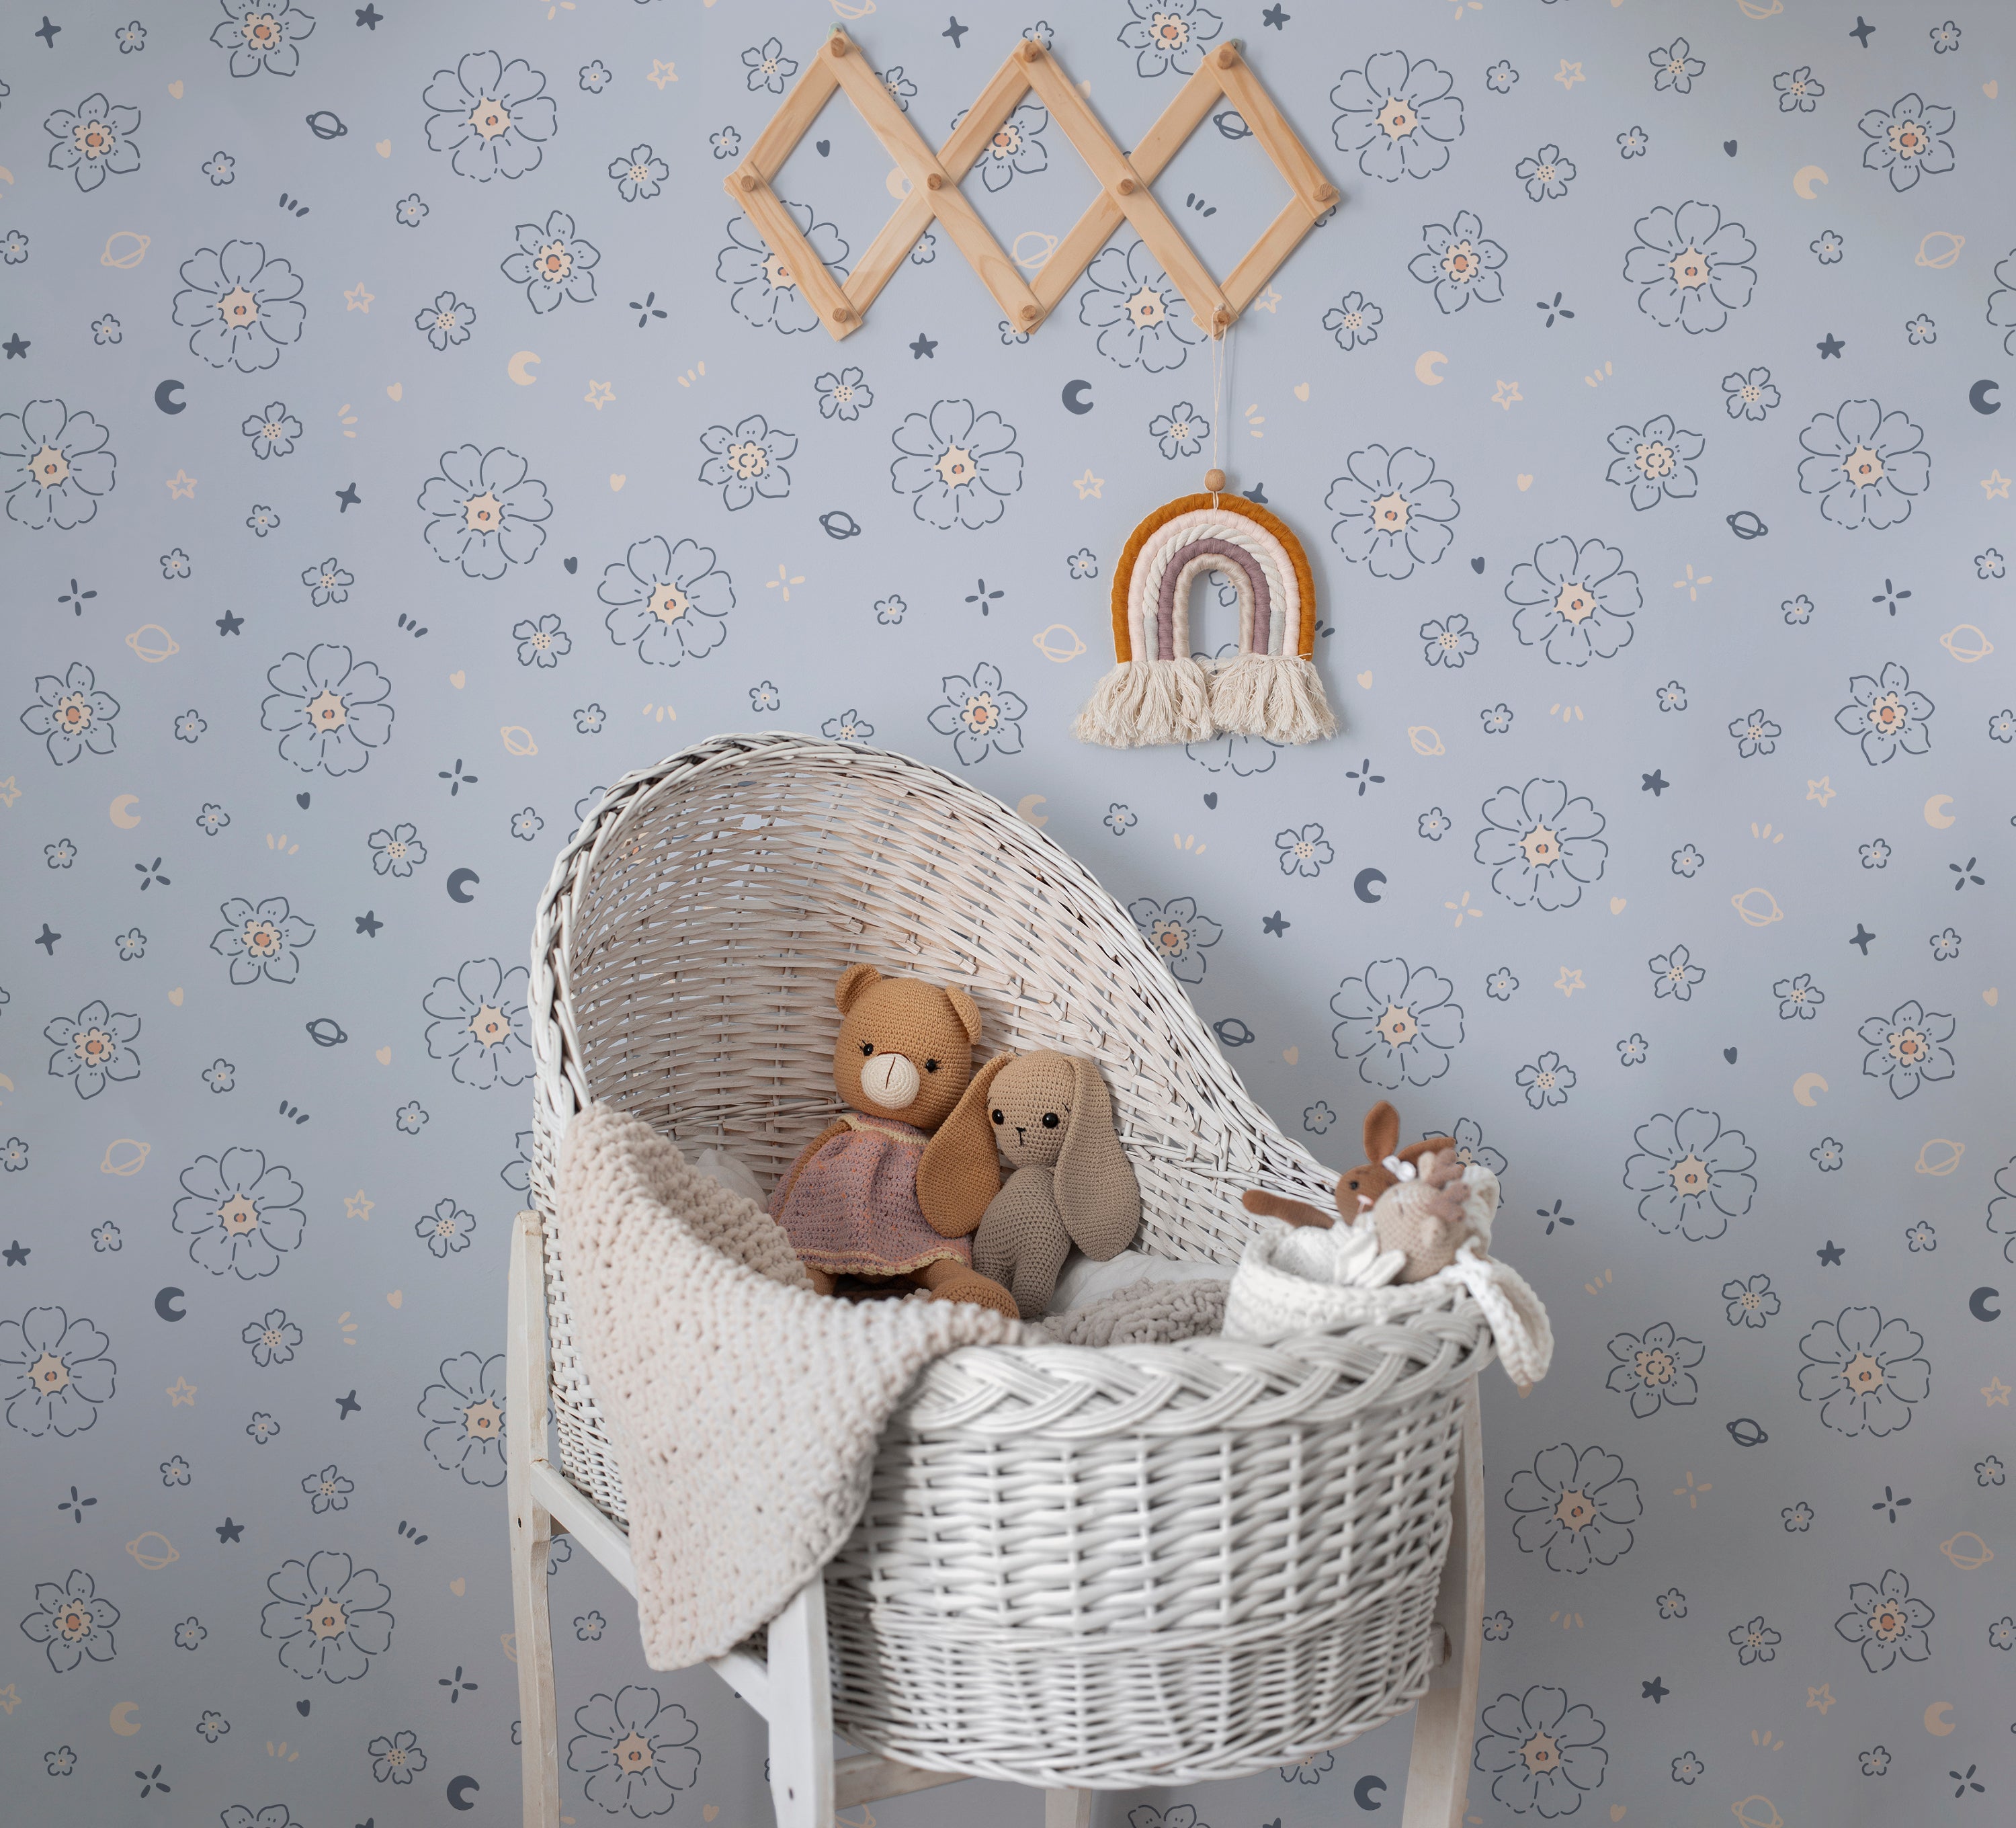 A nursery room enhanced with the Blue Floral Joy Wallpaper, featuring small white floral motifs and playful celestial symbols on a light blue backdrop. The room includes a wicker bassinet filled with plush toys, creating a warm and inviting space for a child